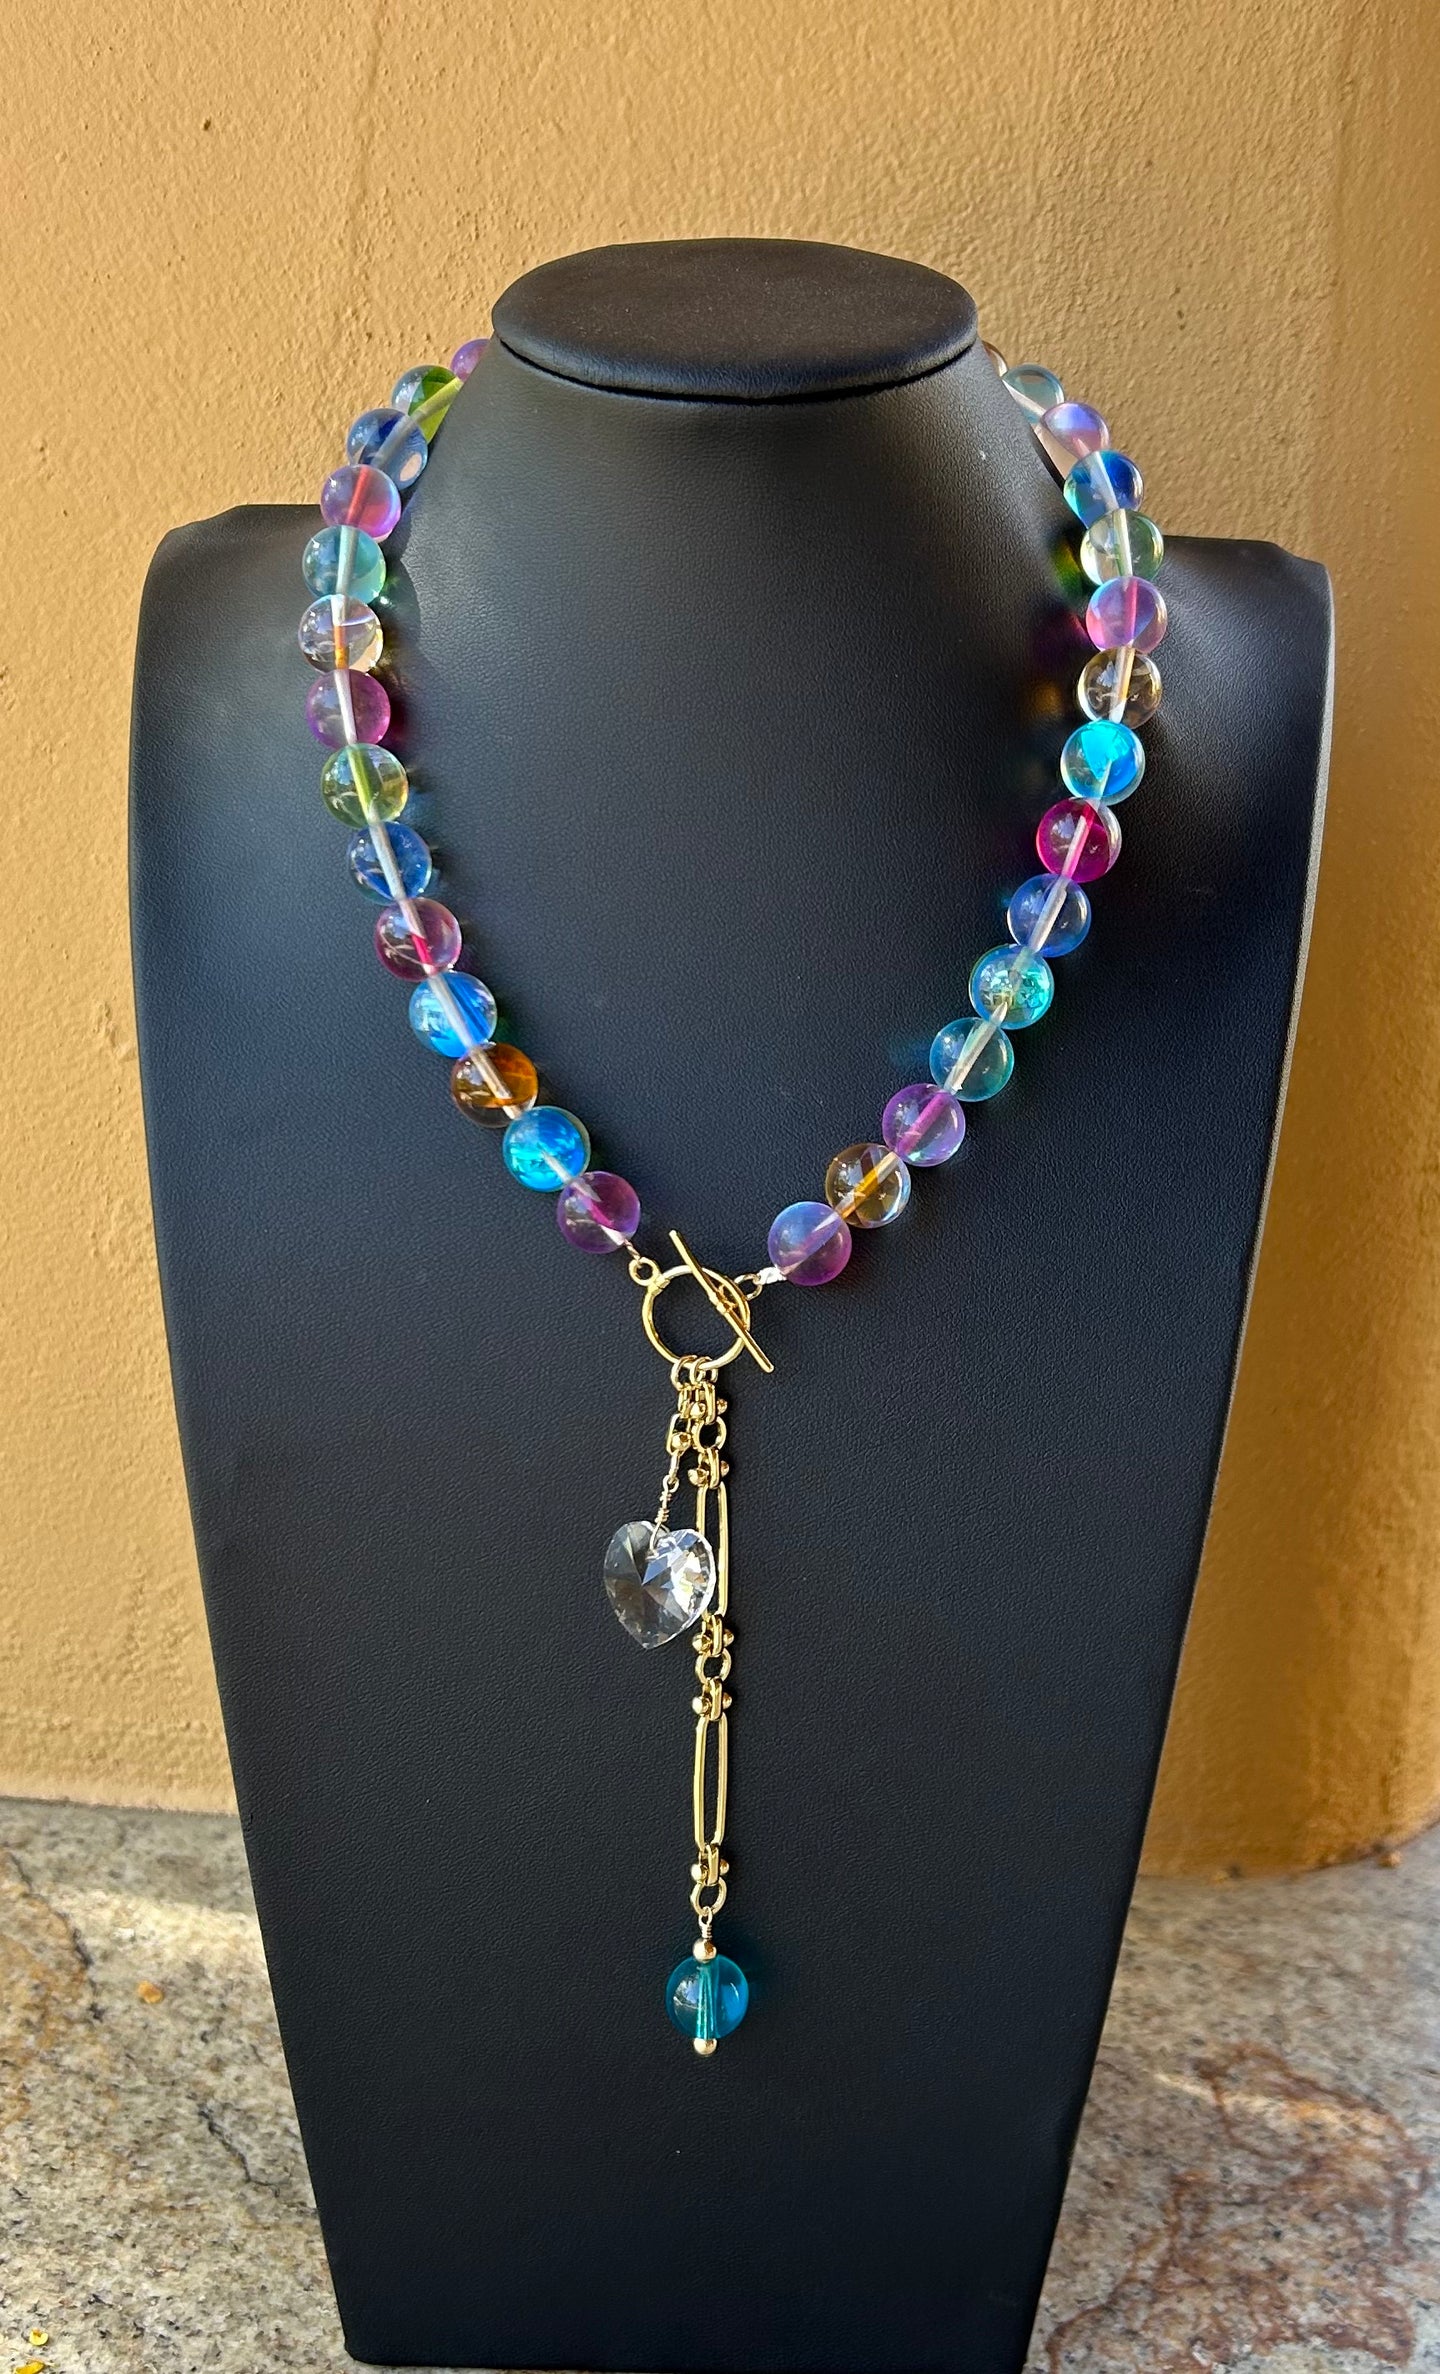 Necklace - multi color quartz beads with 14K gold filled toggle and charms